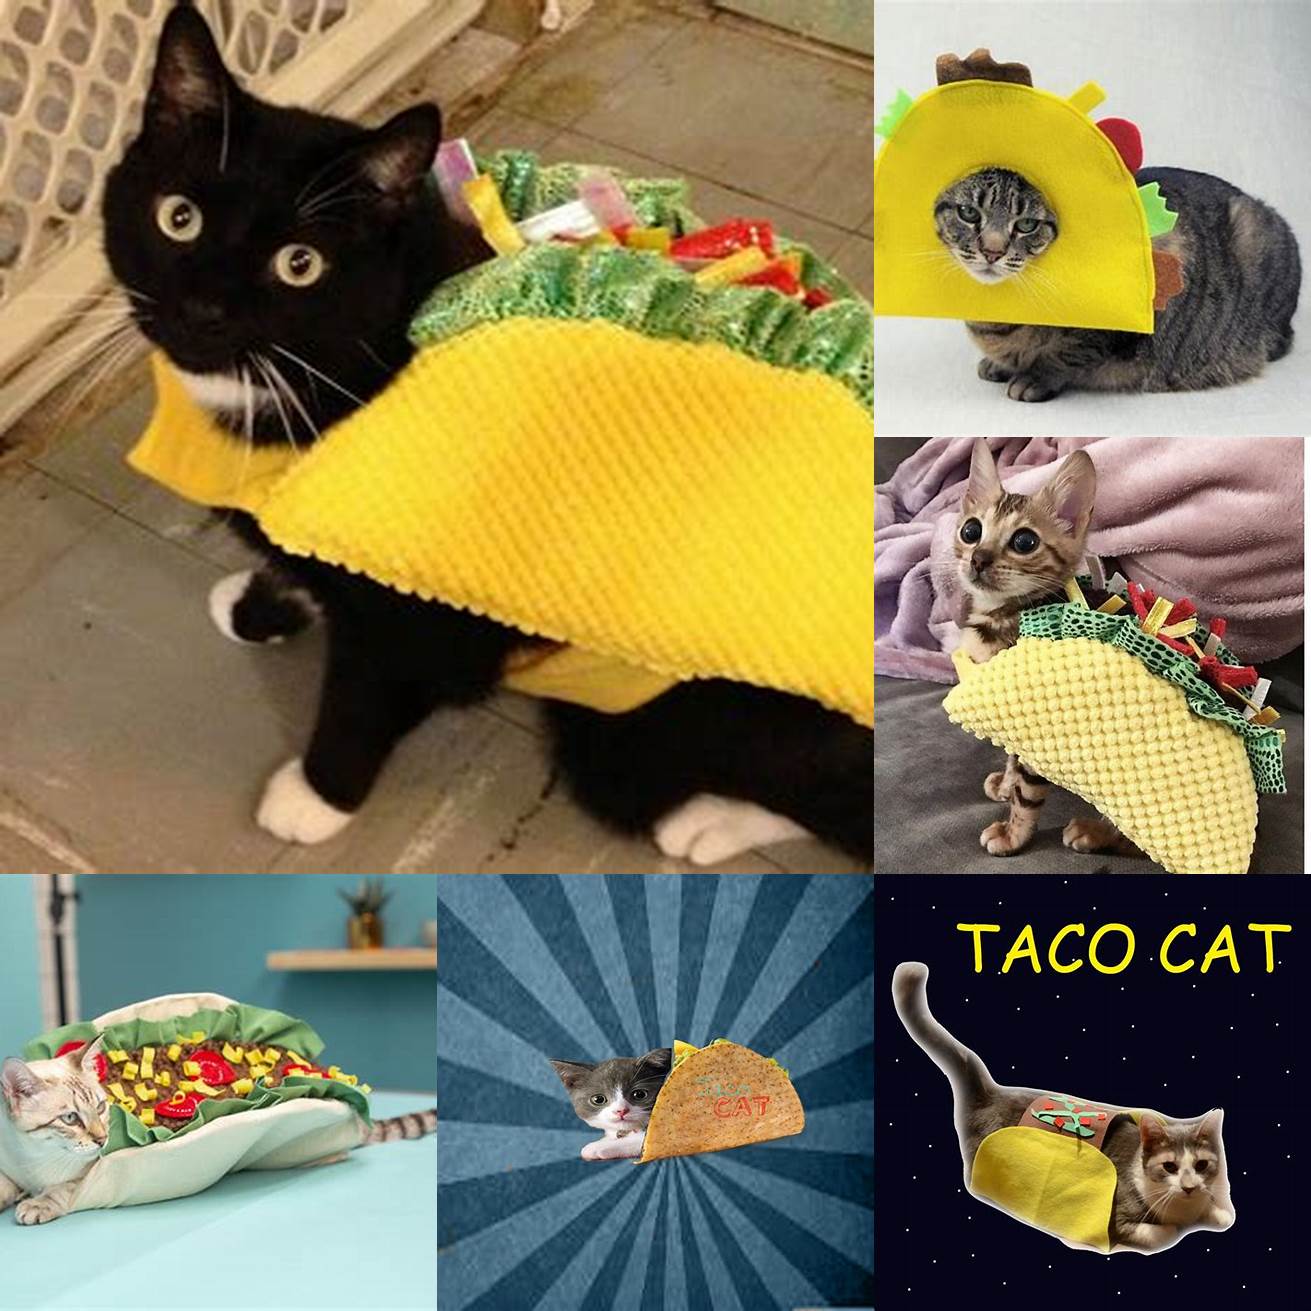 A Cat with Taco Ingredients on its Head